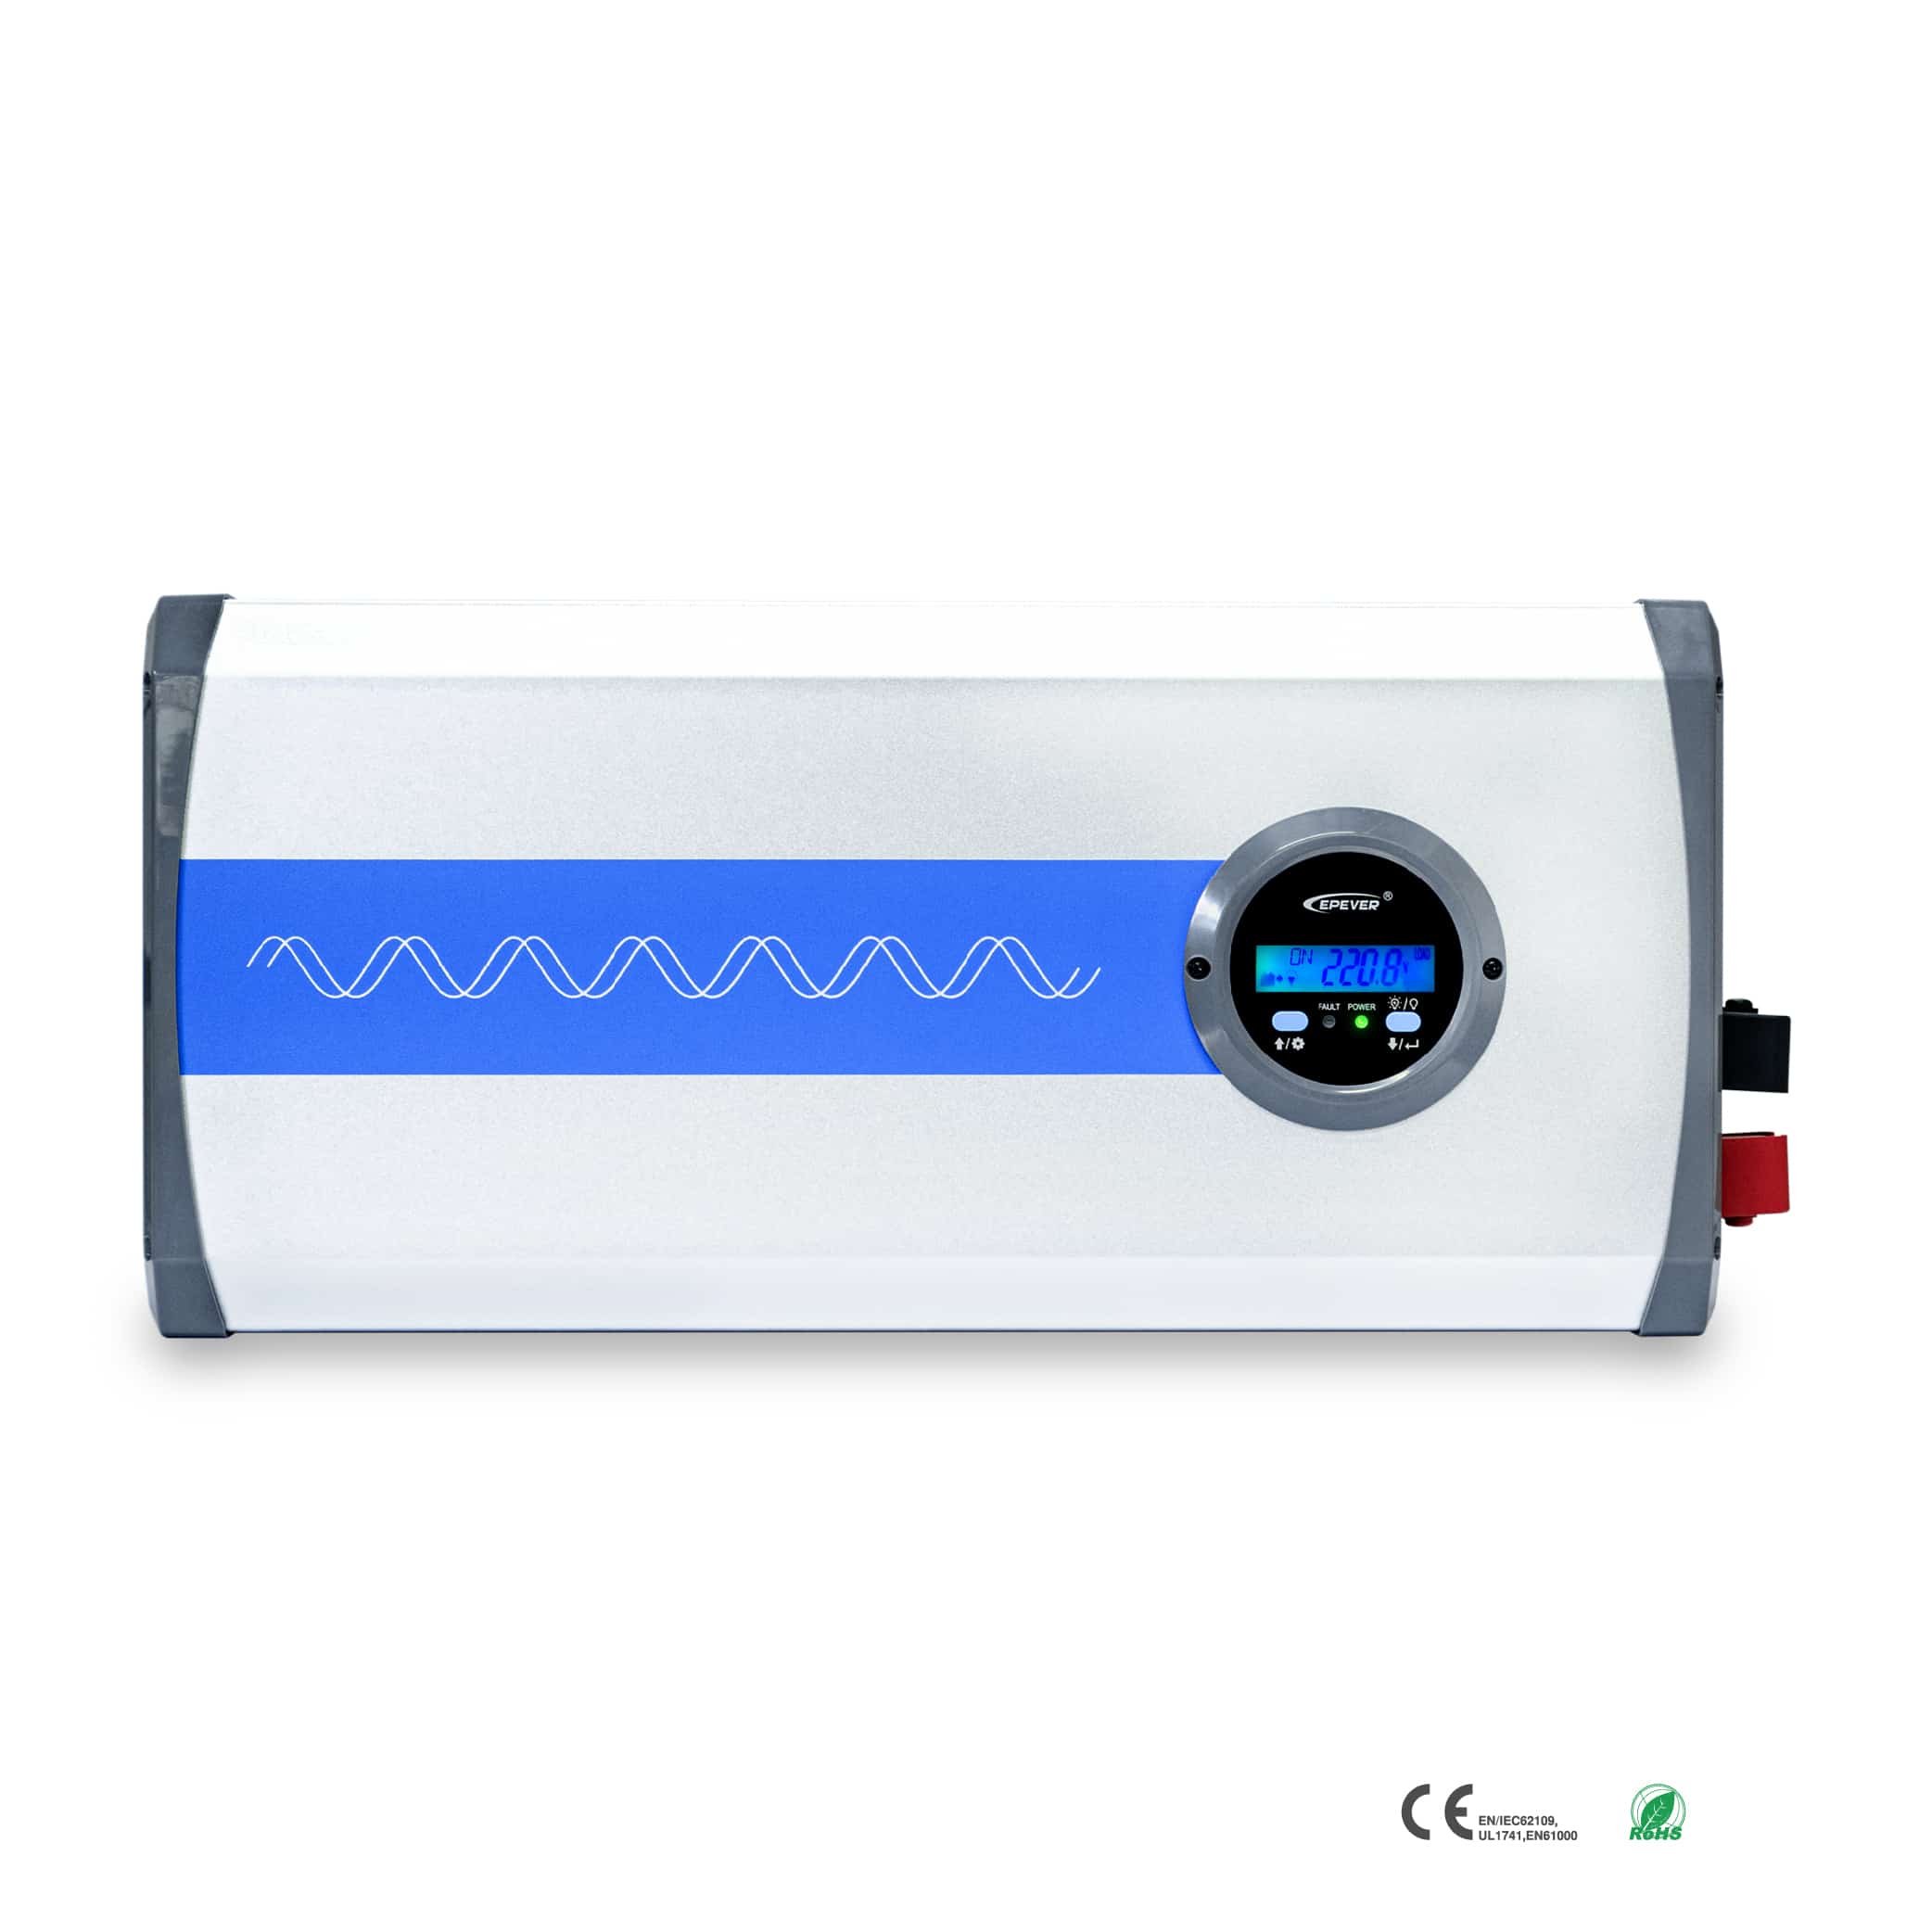 EPEVER Pure Sine Wave Inverter - 12V 1000W - IP1000-12-PLUS(T)